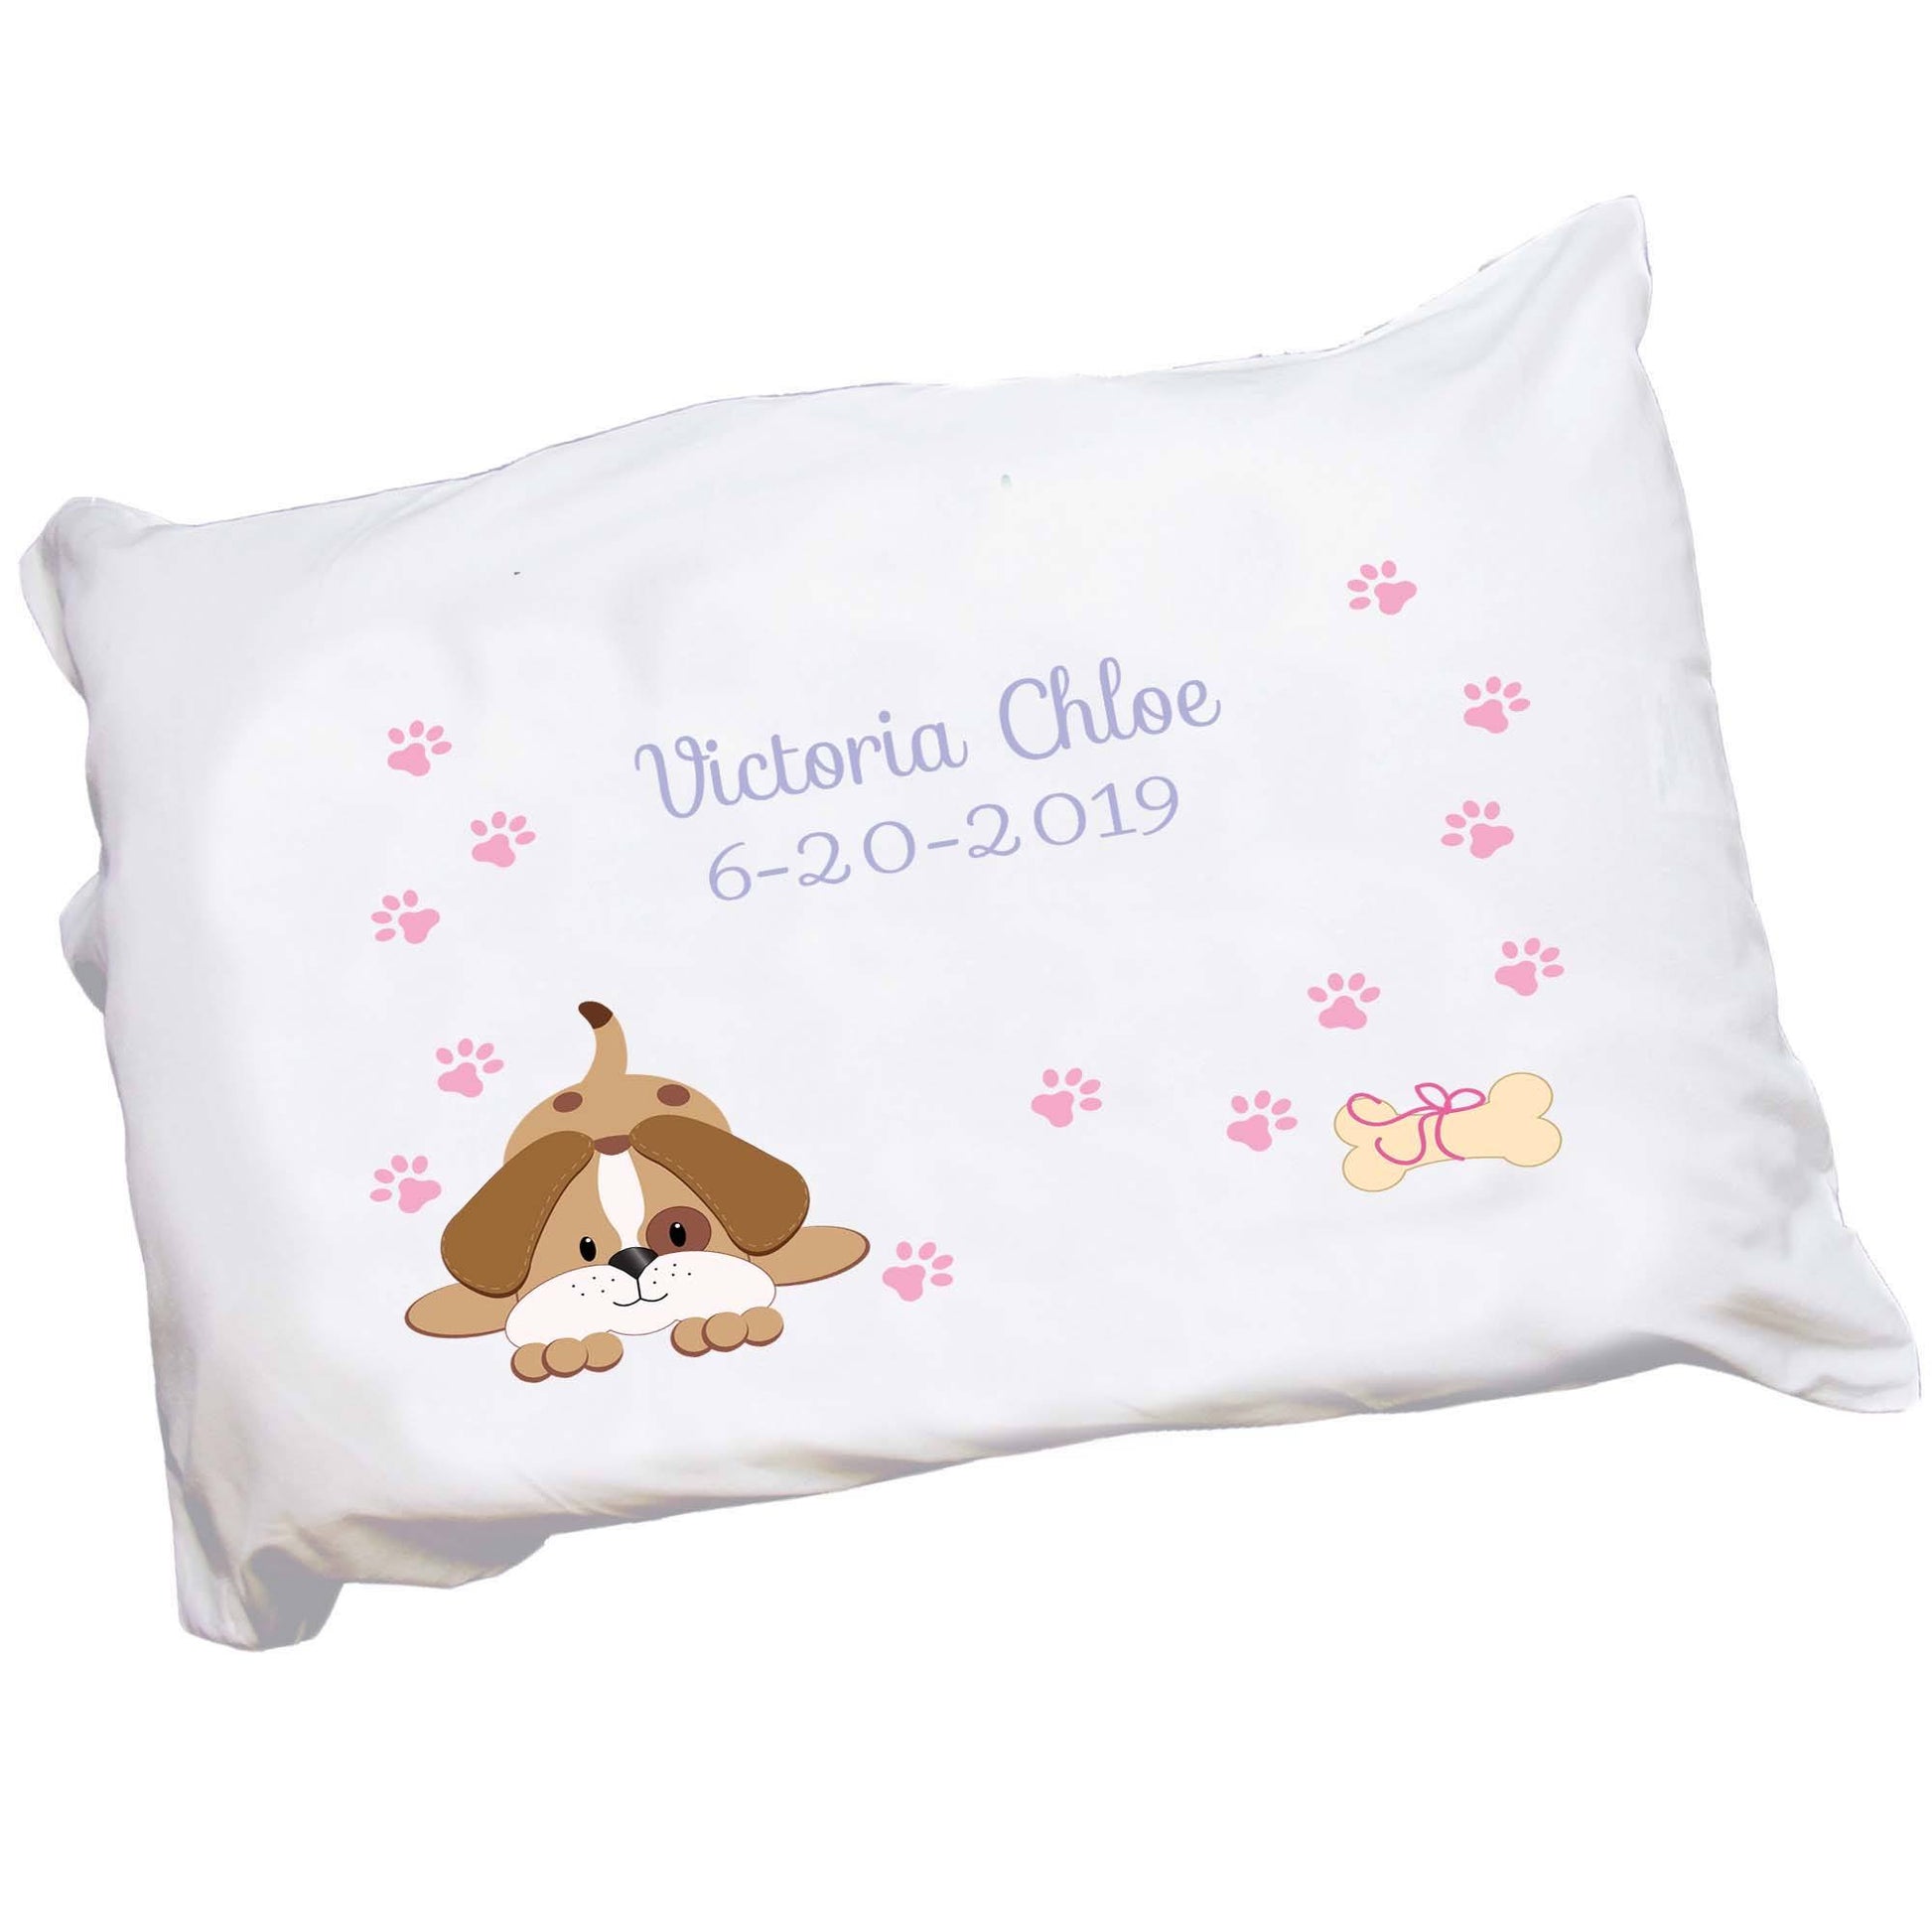 Personalized Childrens Pillowcase with Pink Puppy Dog